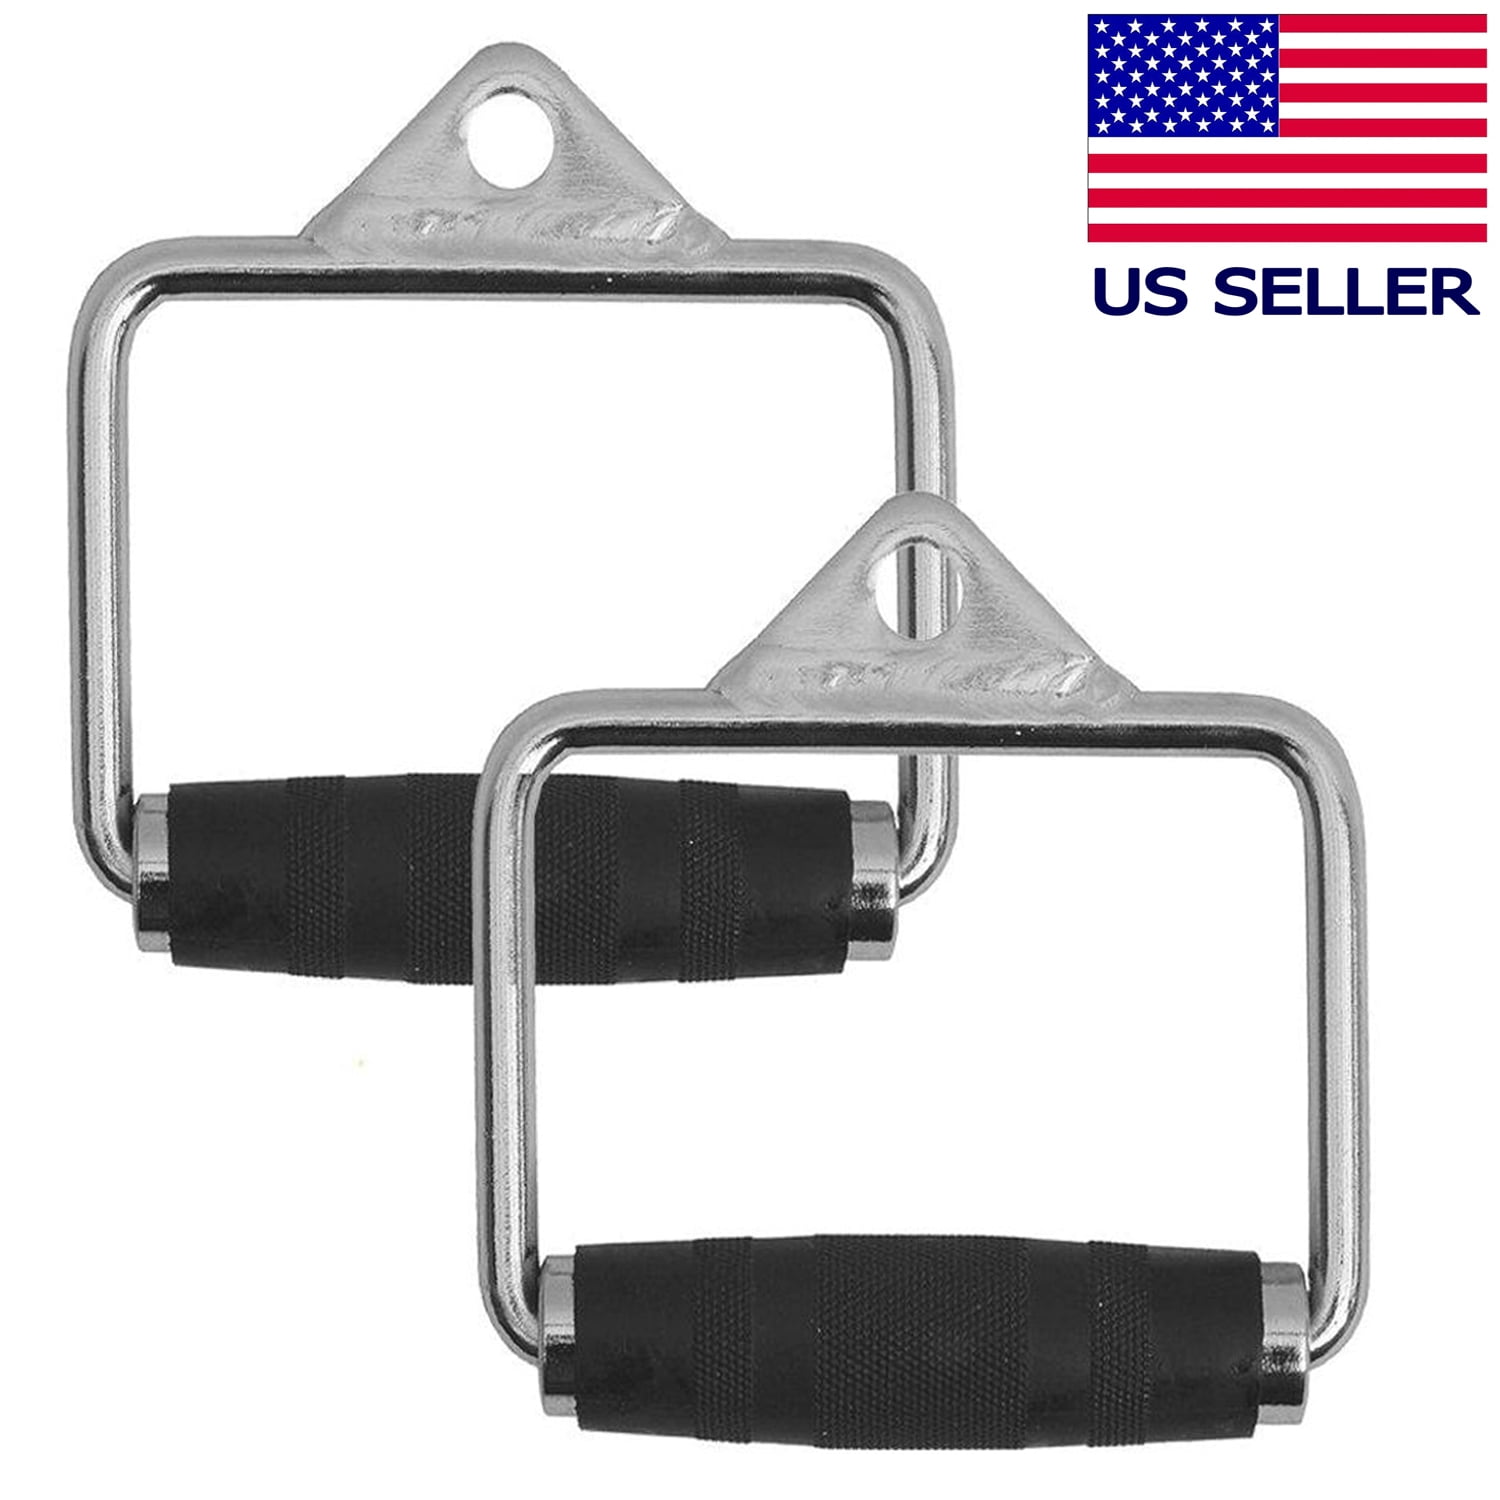 1-D STIRRUP HANDLE Strap SINGLE  For  Pulley Gym Cable Machine Attachment 